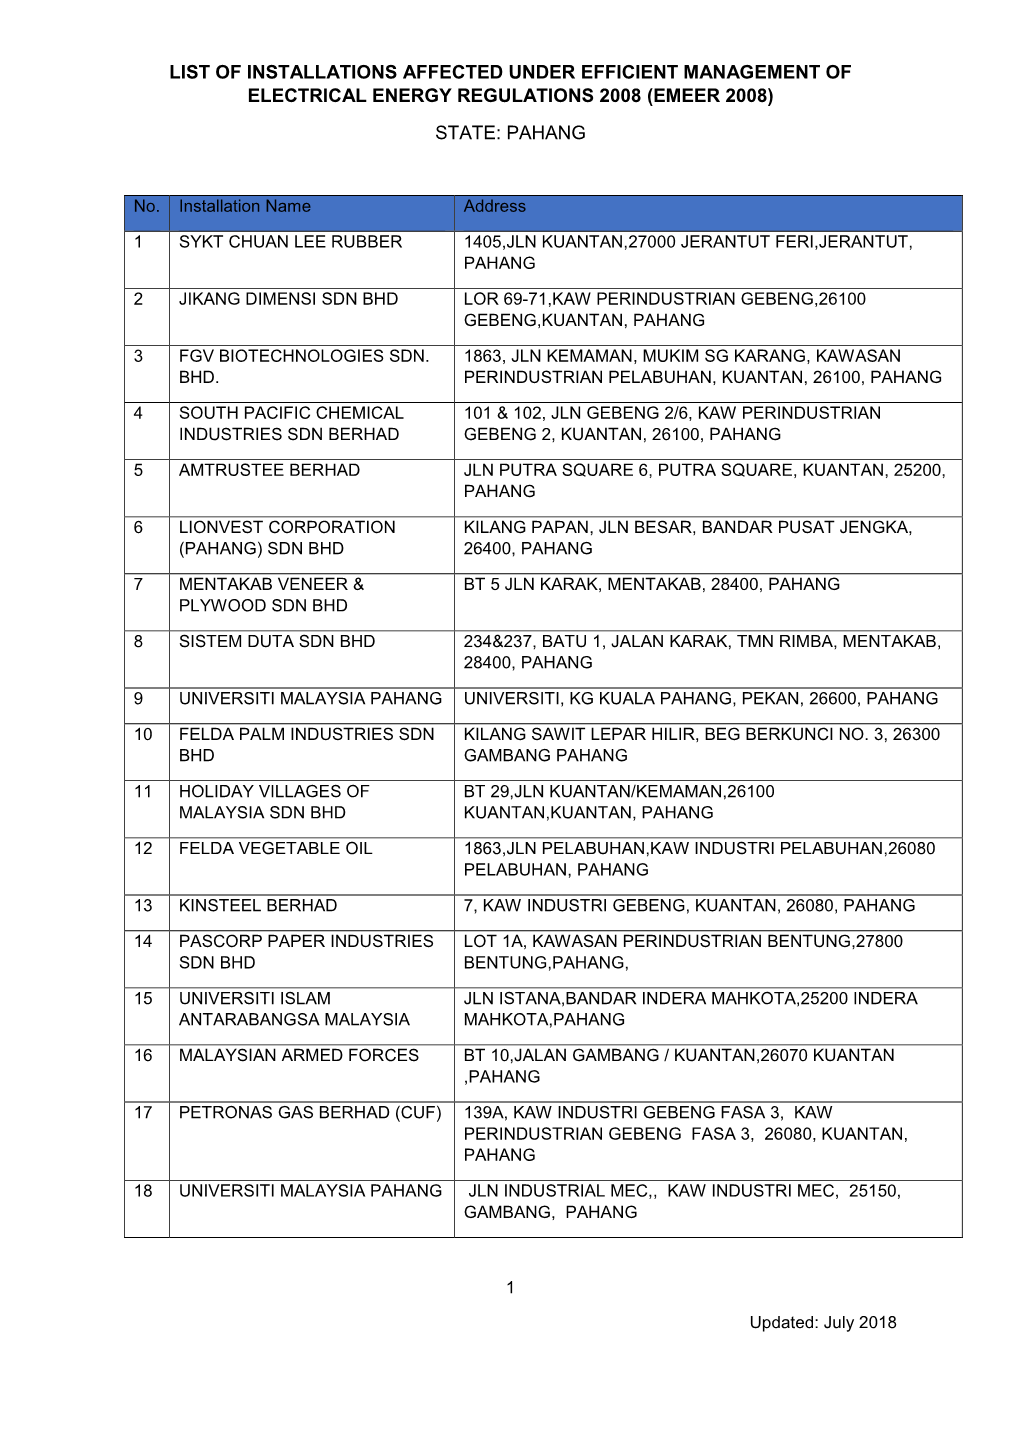 List of Installations Affected Under Efficient Management of Electrical Energy Regulations 2008 (Emeer 2008) State: Pahang